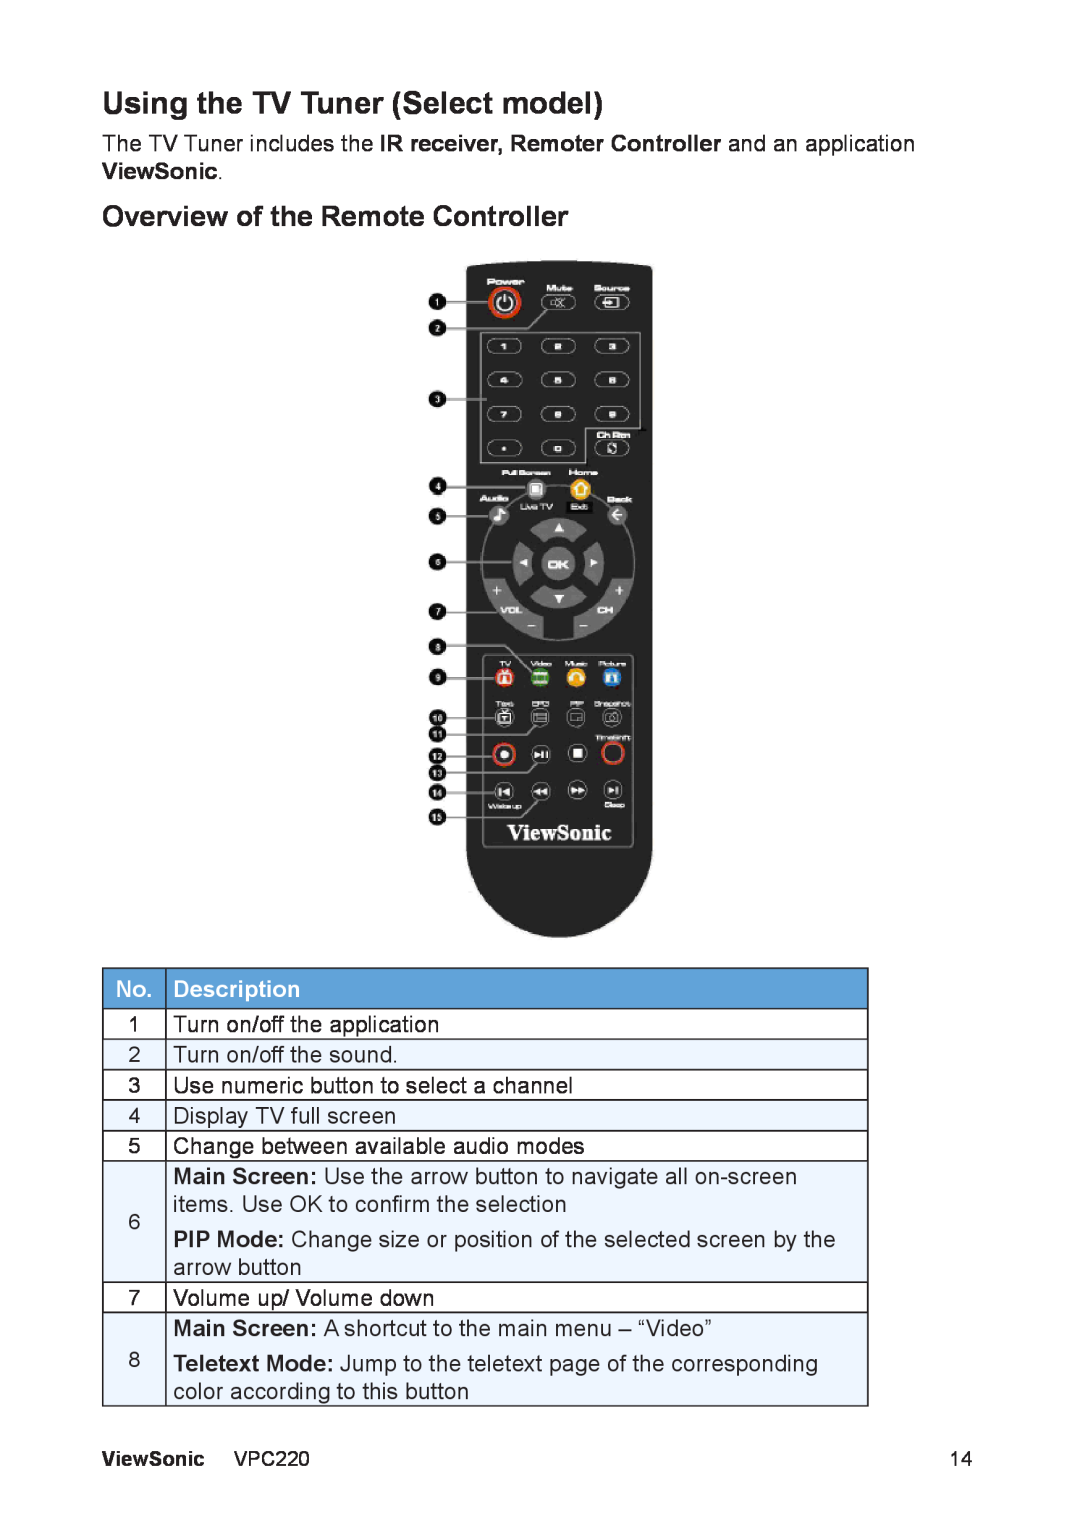 ViewSonic VS13426 manual Using the TV Tuner Select model, Overview of the Remote Controller, No. Description 